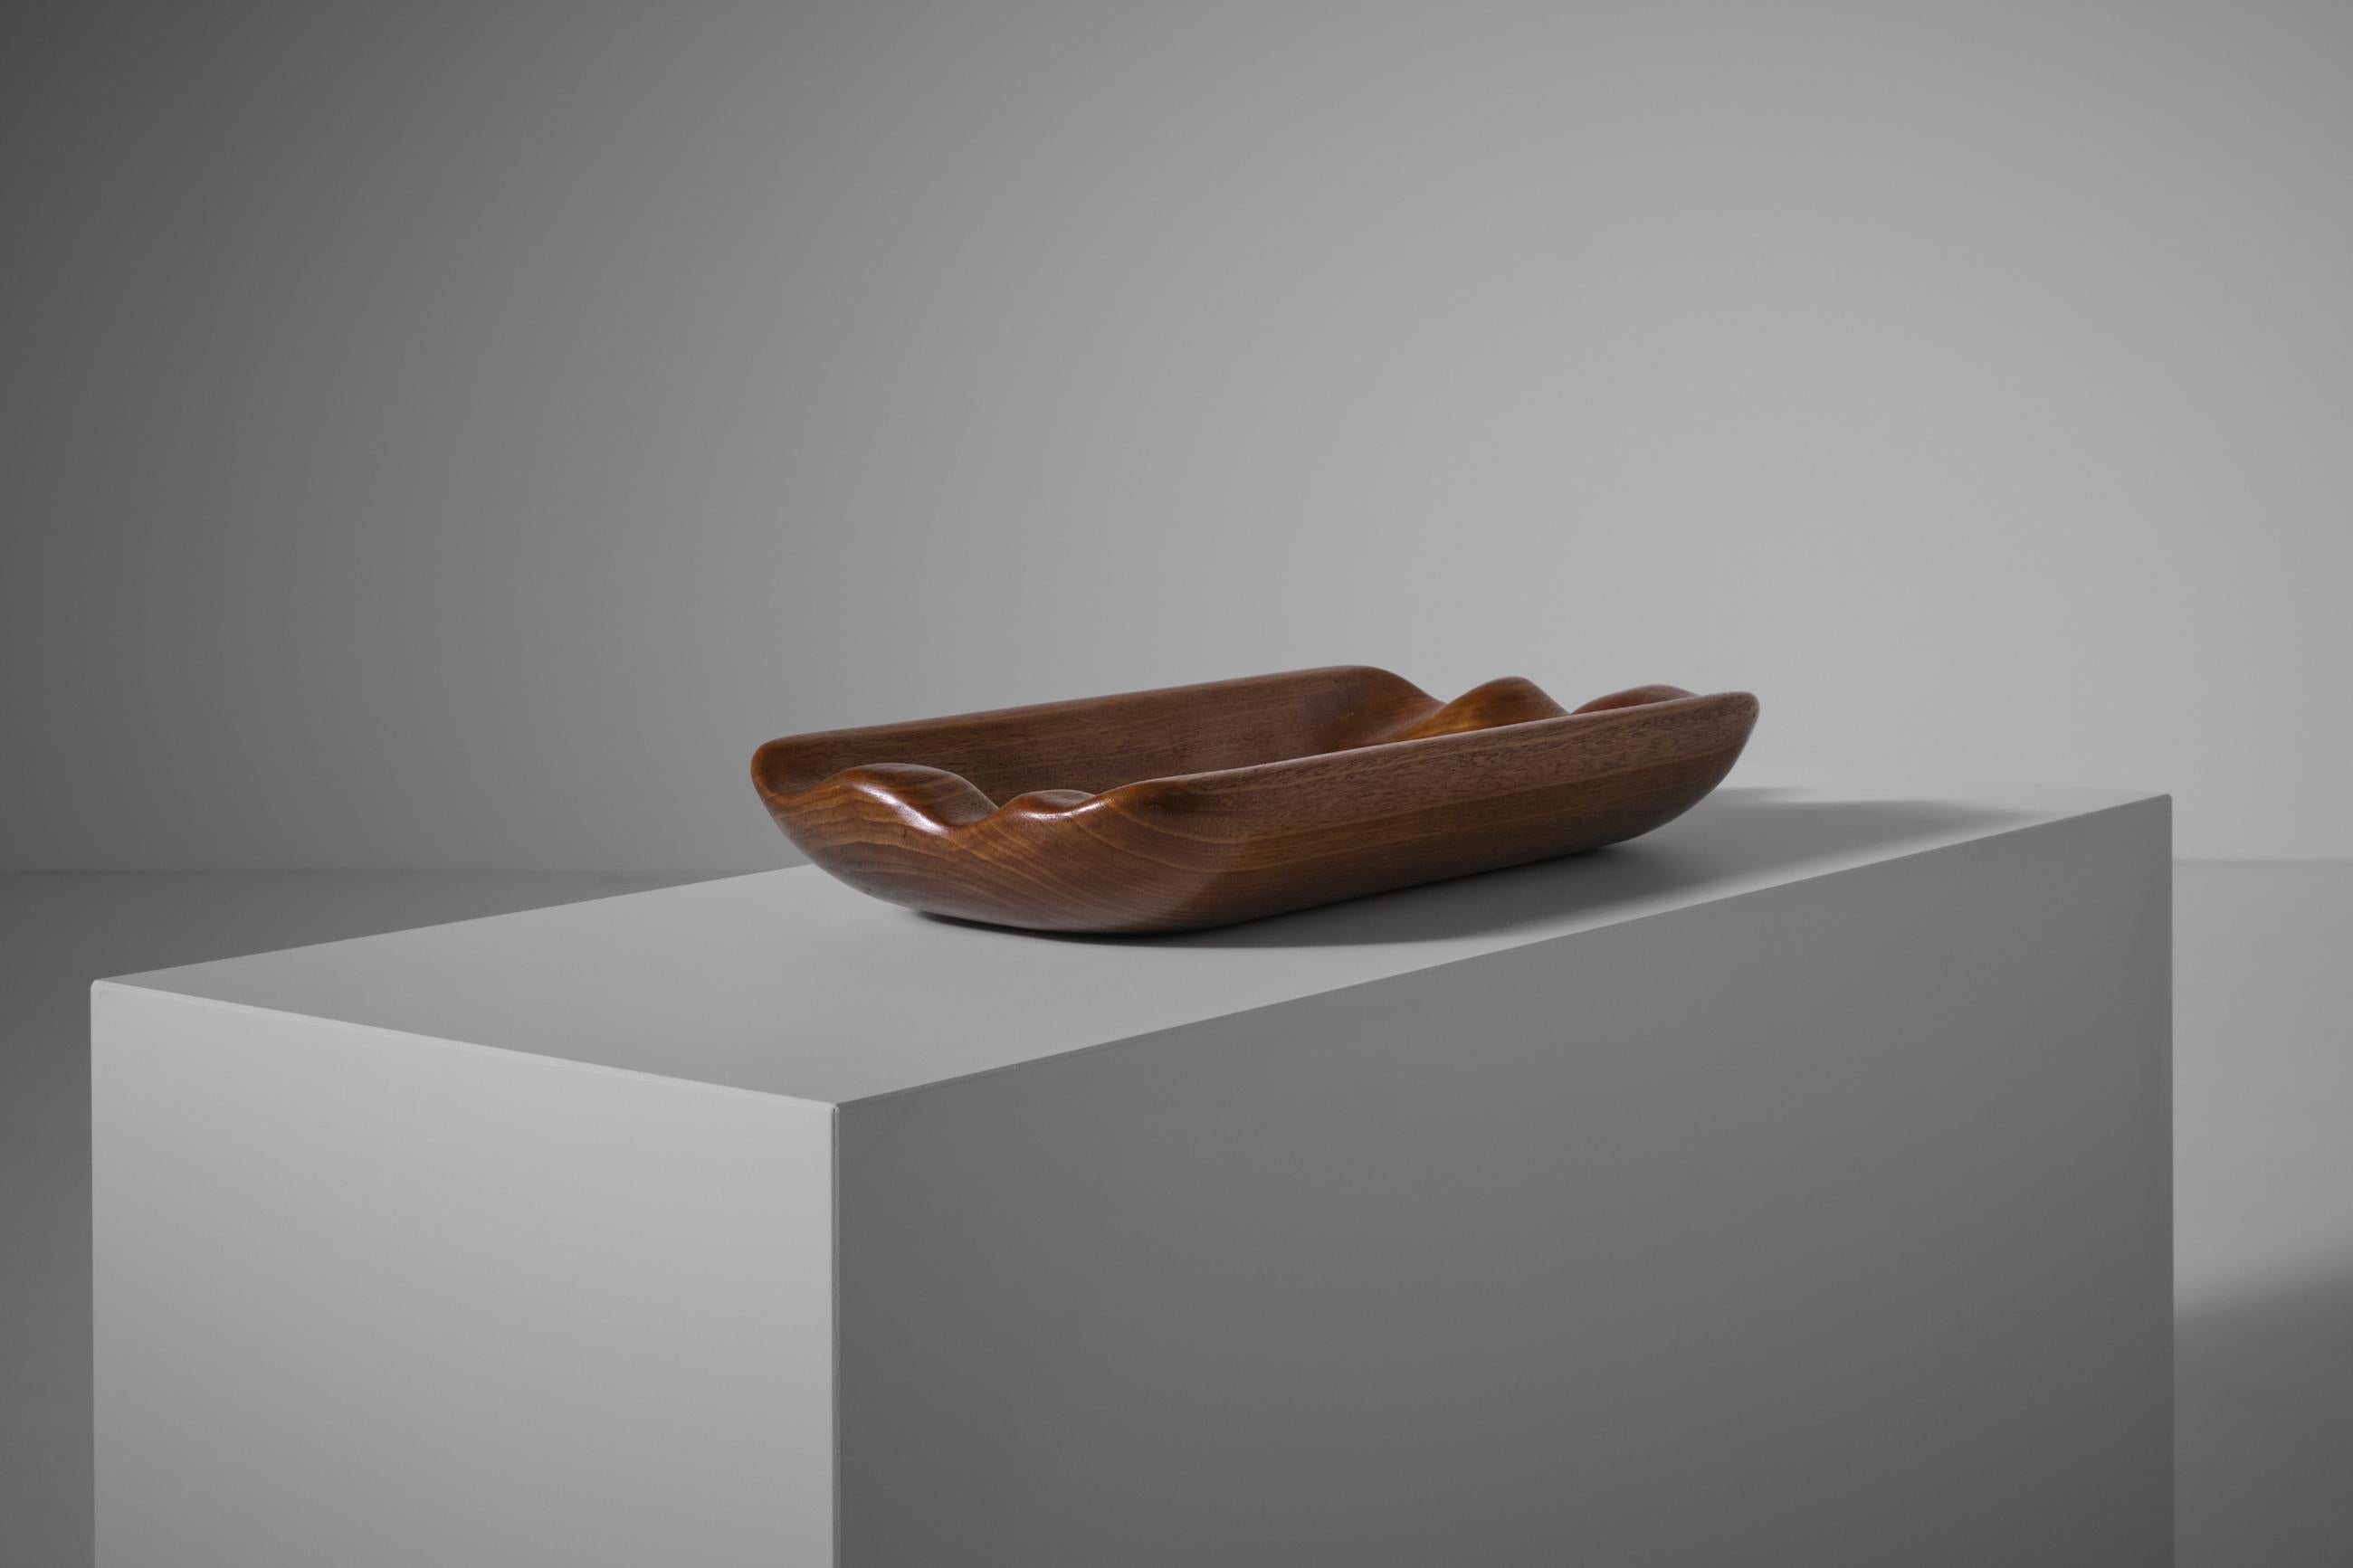 Organic Vide Poche France 1950's. The platter is hand carved out of solid Mahogany in the style of Alexandre Noll. Beautiful organic which fluently flow over into each other, made with a great feeling and technique.
The work comes from France, and